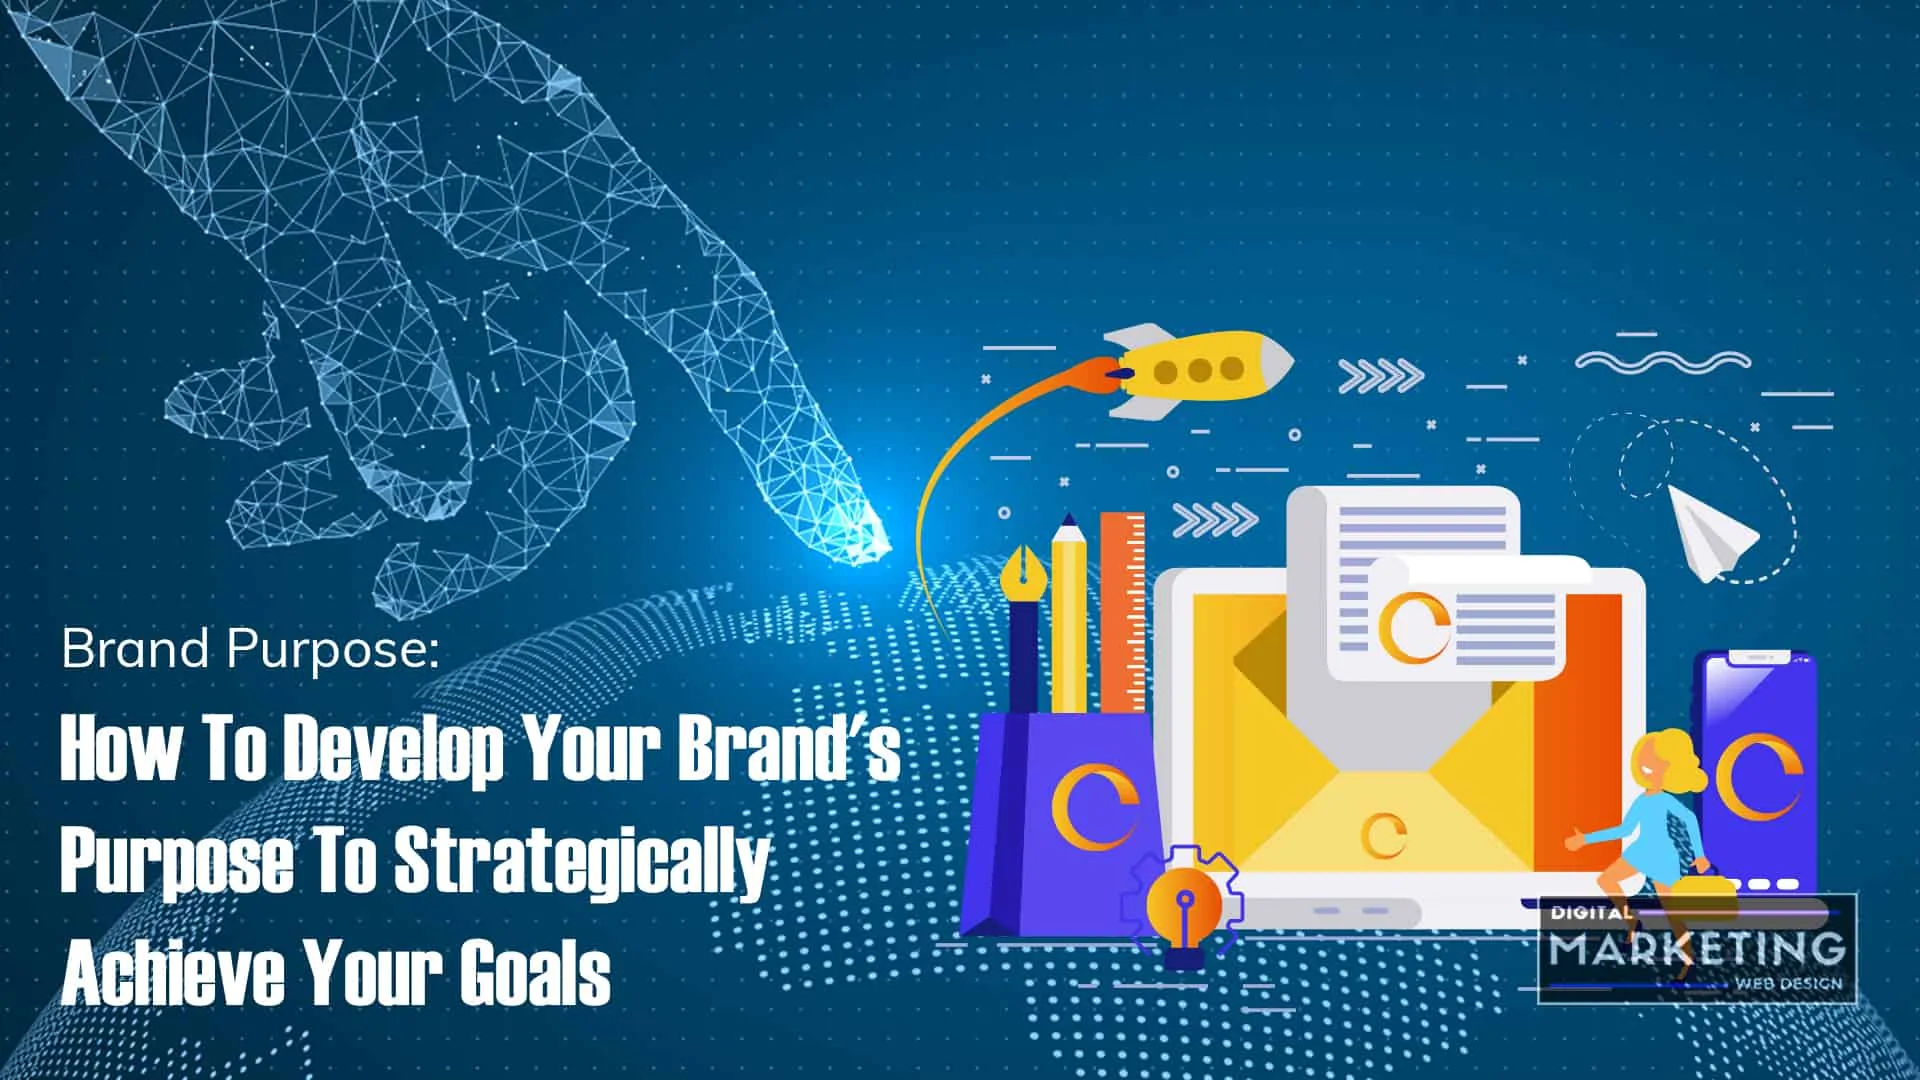 Brand Purpose: How To Develop Your Brand's Purpose To Strategically Achieve Your Goals